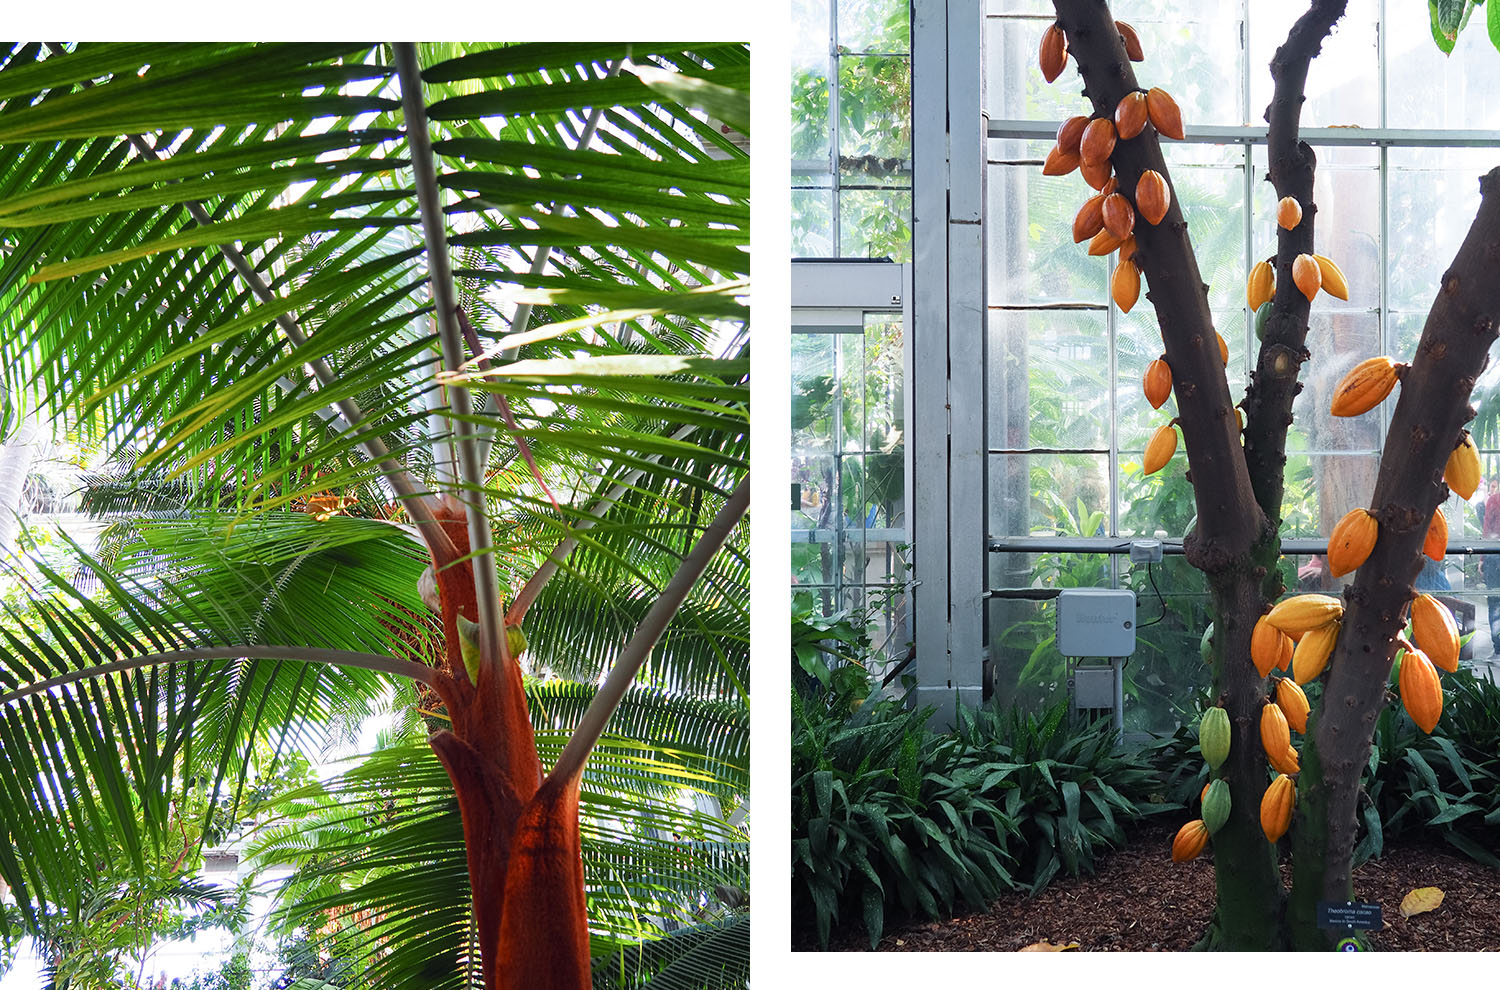 Palm and cacao trees at the United States Botanic Garden in Washington DC, as captured by travel blogger Cee Fardoe of Coco & Vera